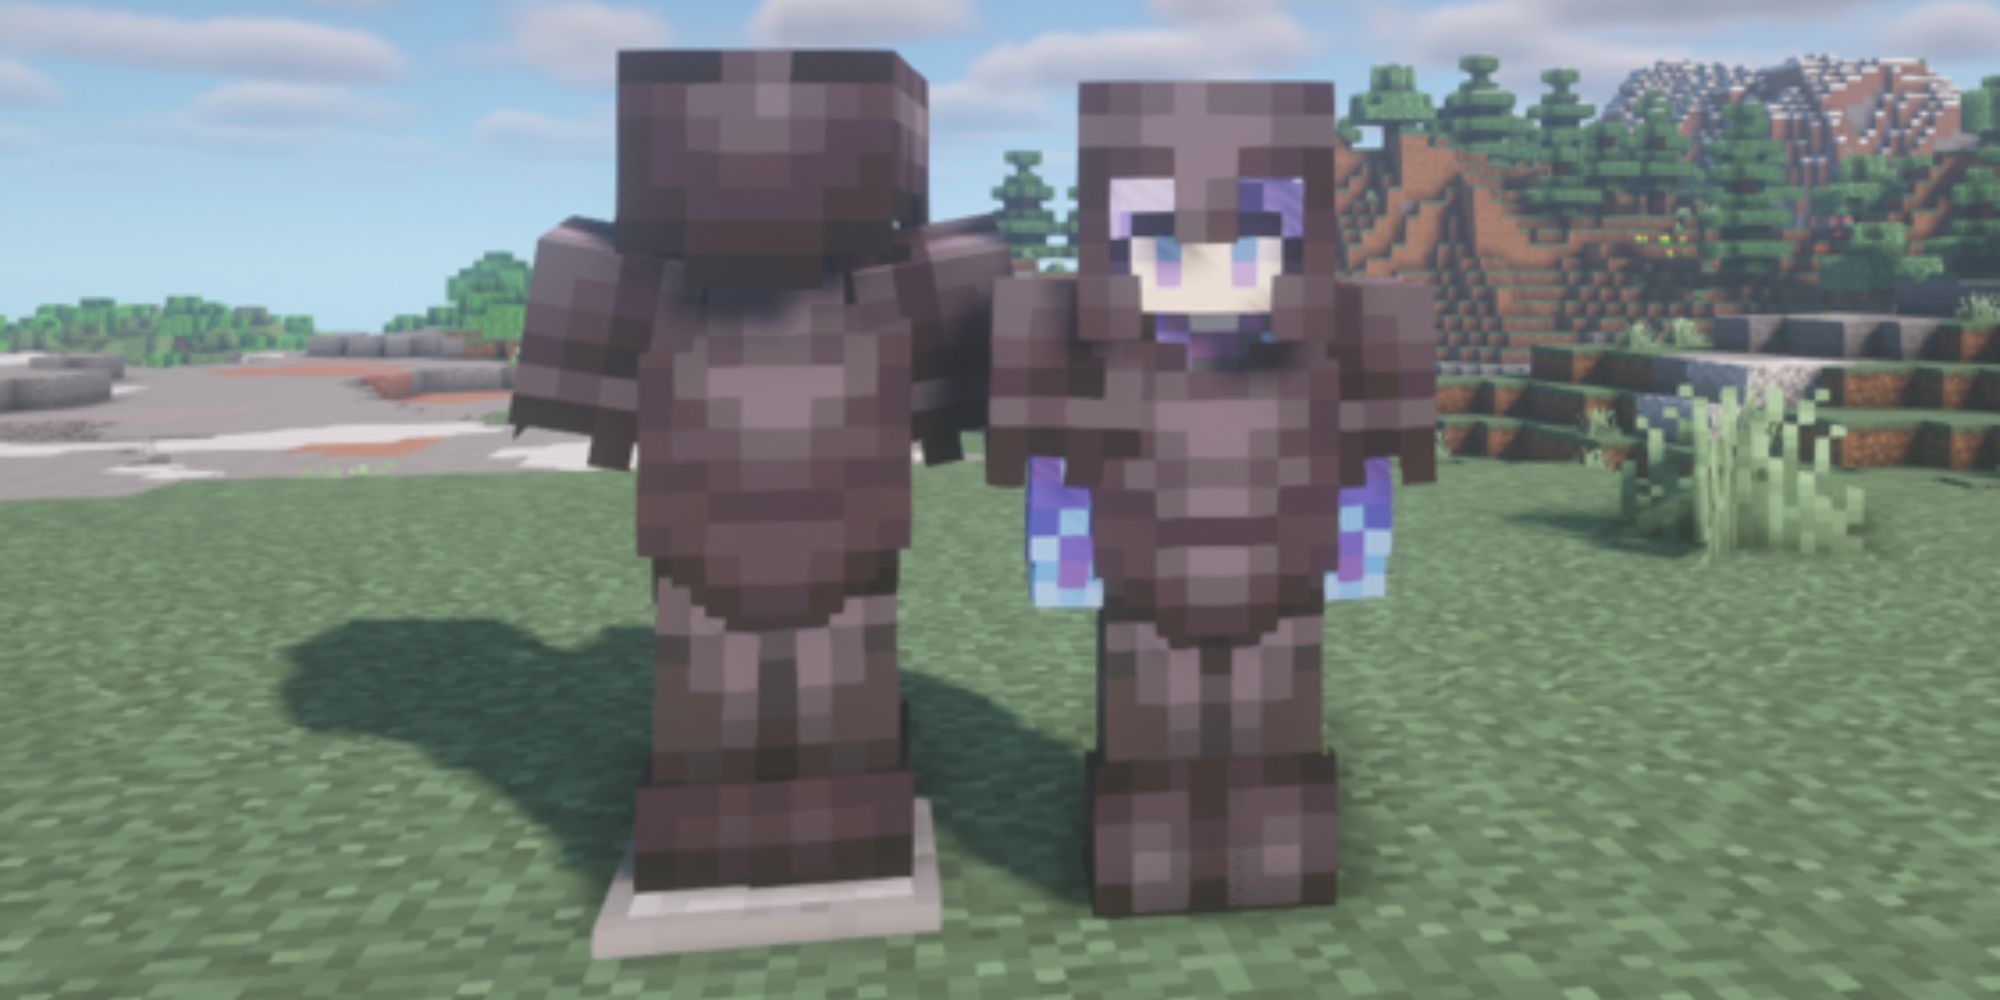 Minecraft Netherite Armor Set on character and mannequin side by side